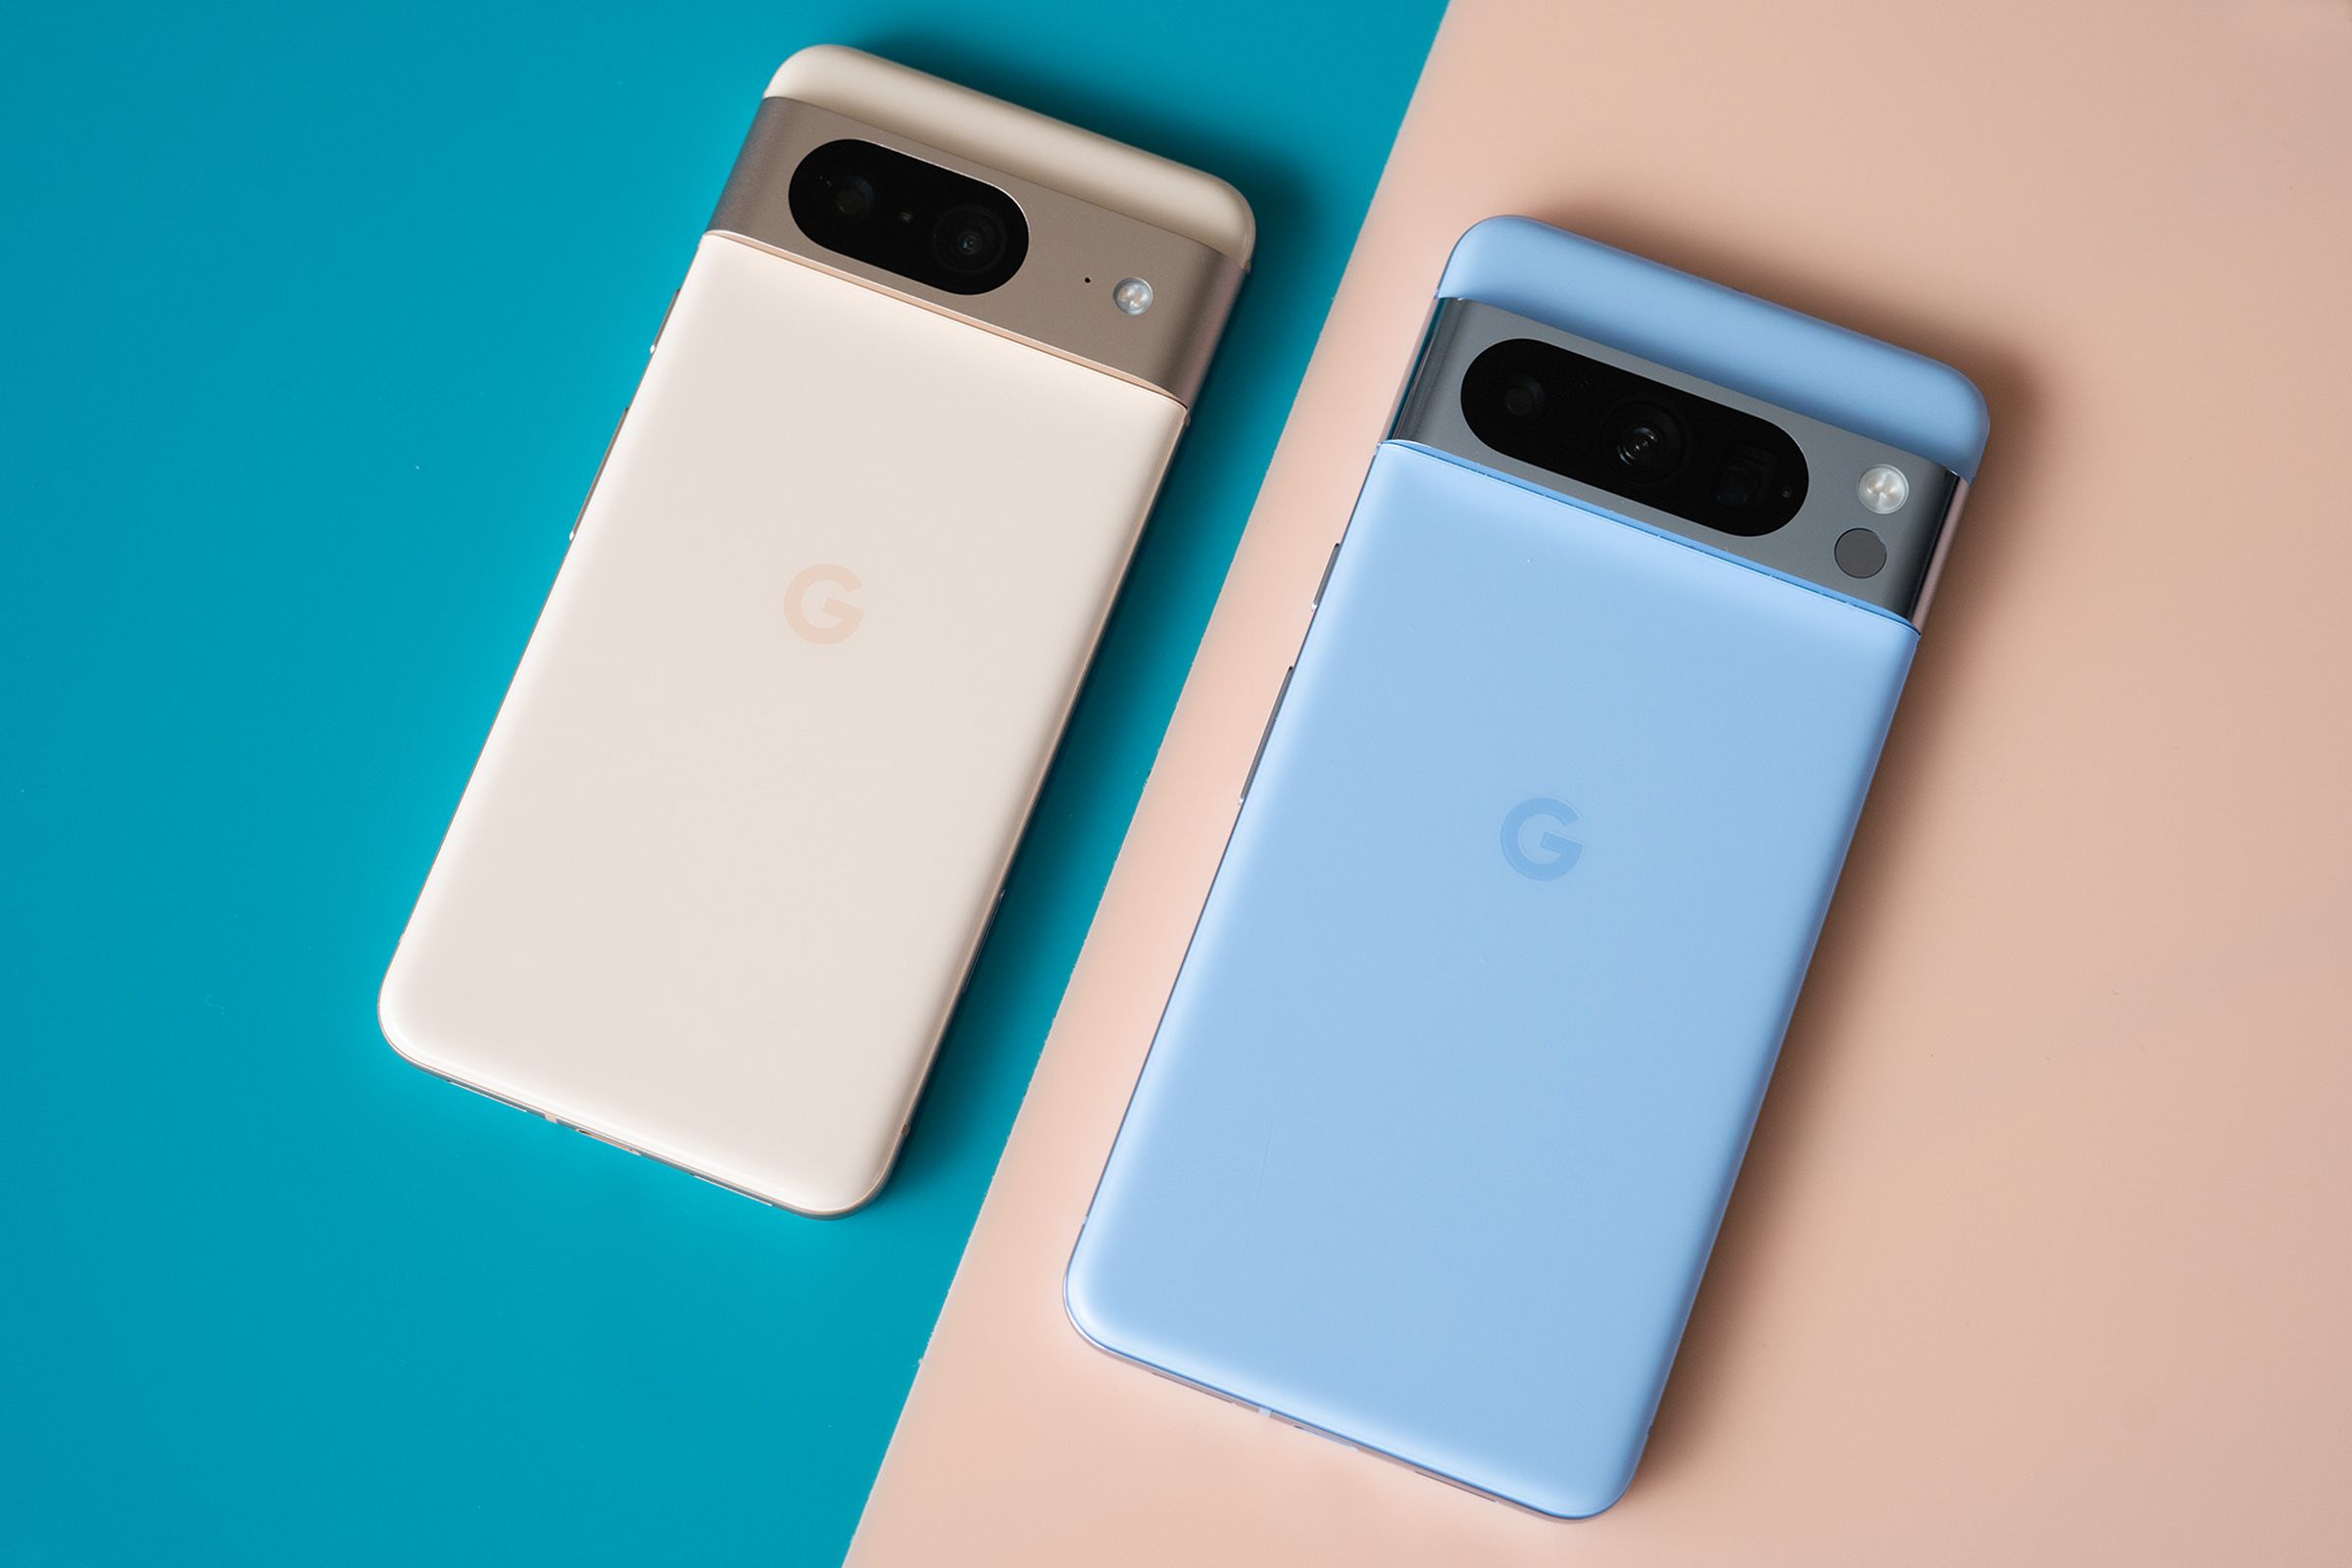 Google Pixel 8 and Pixel 8 Pro on blue and pink backgrounds showing rear panels.